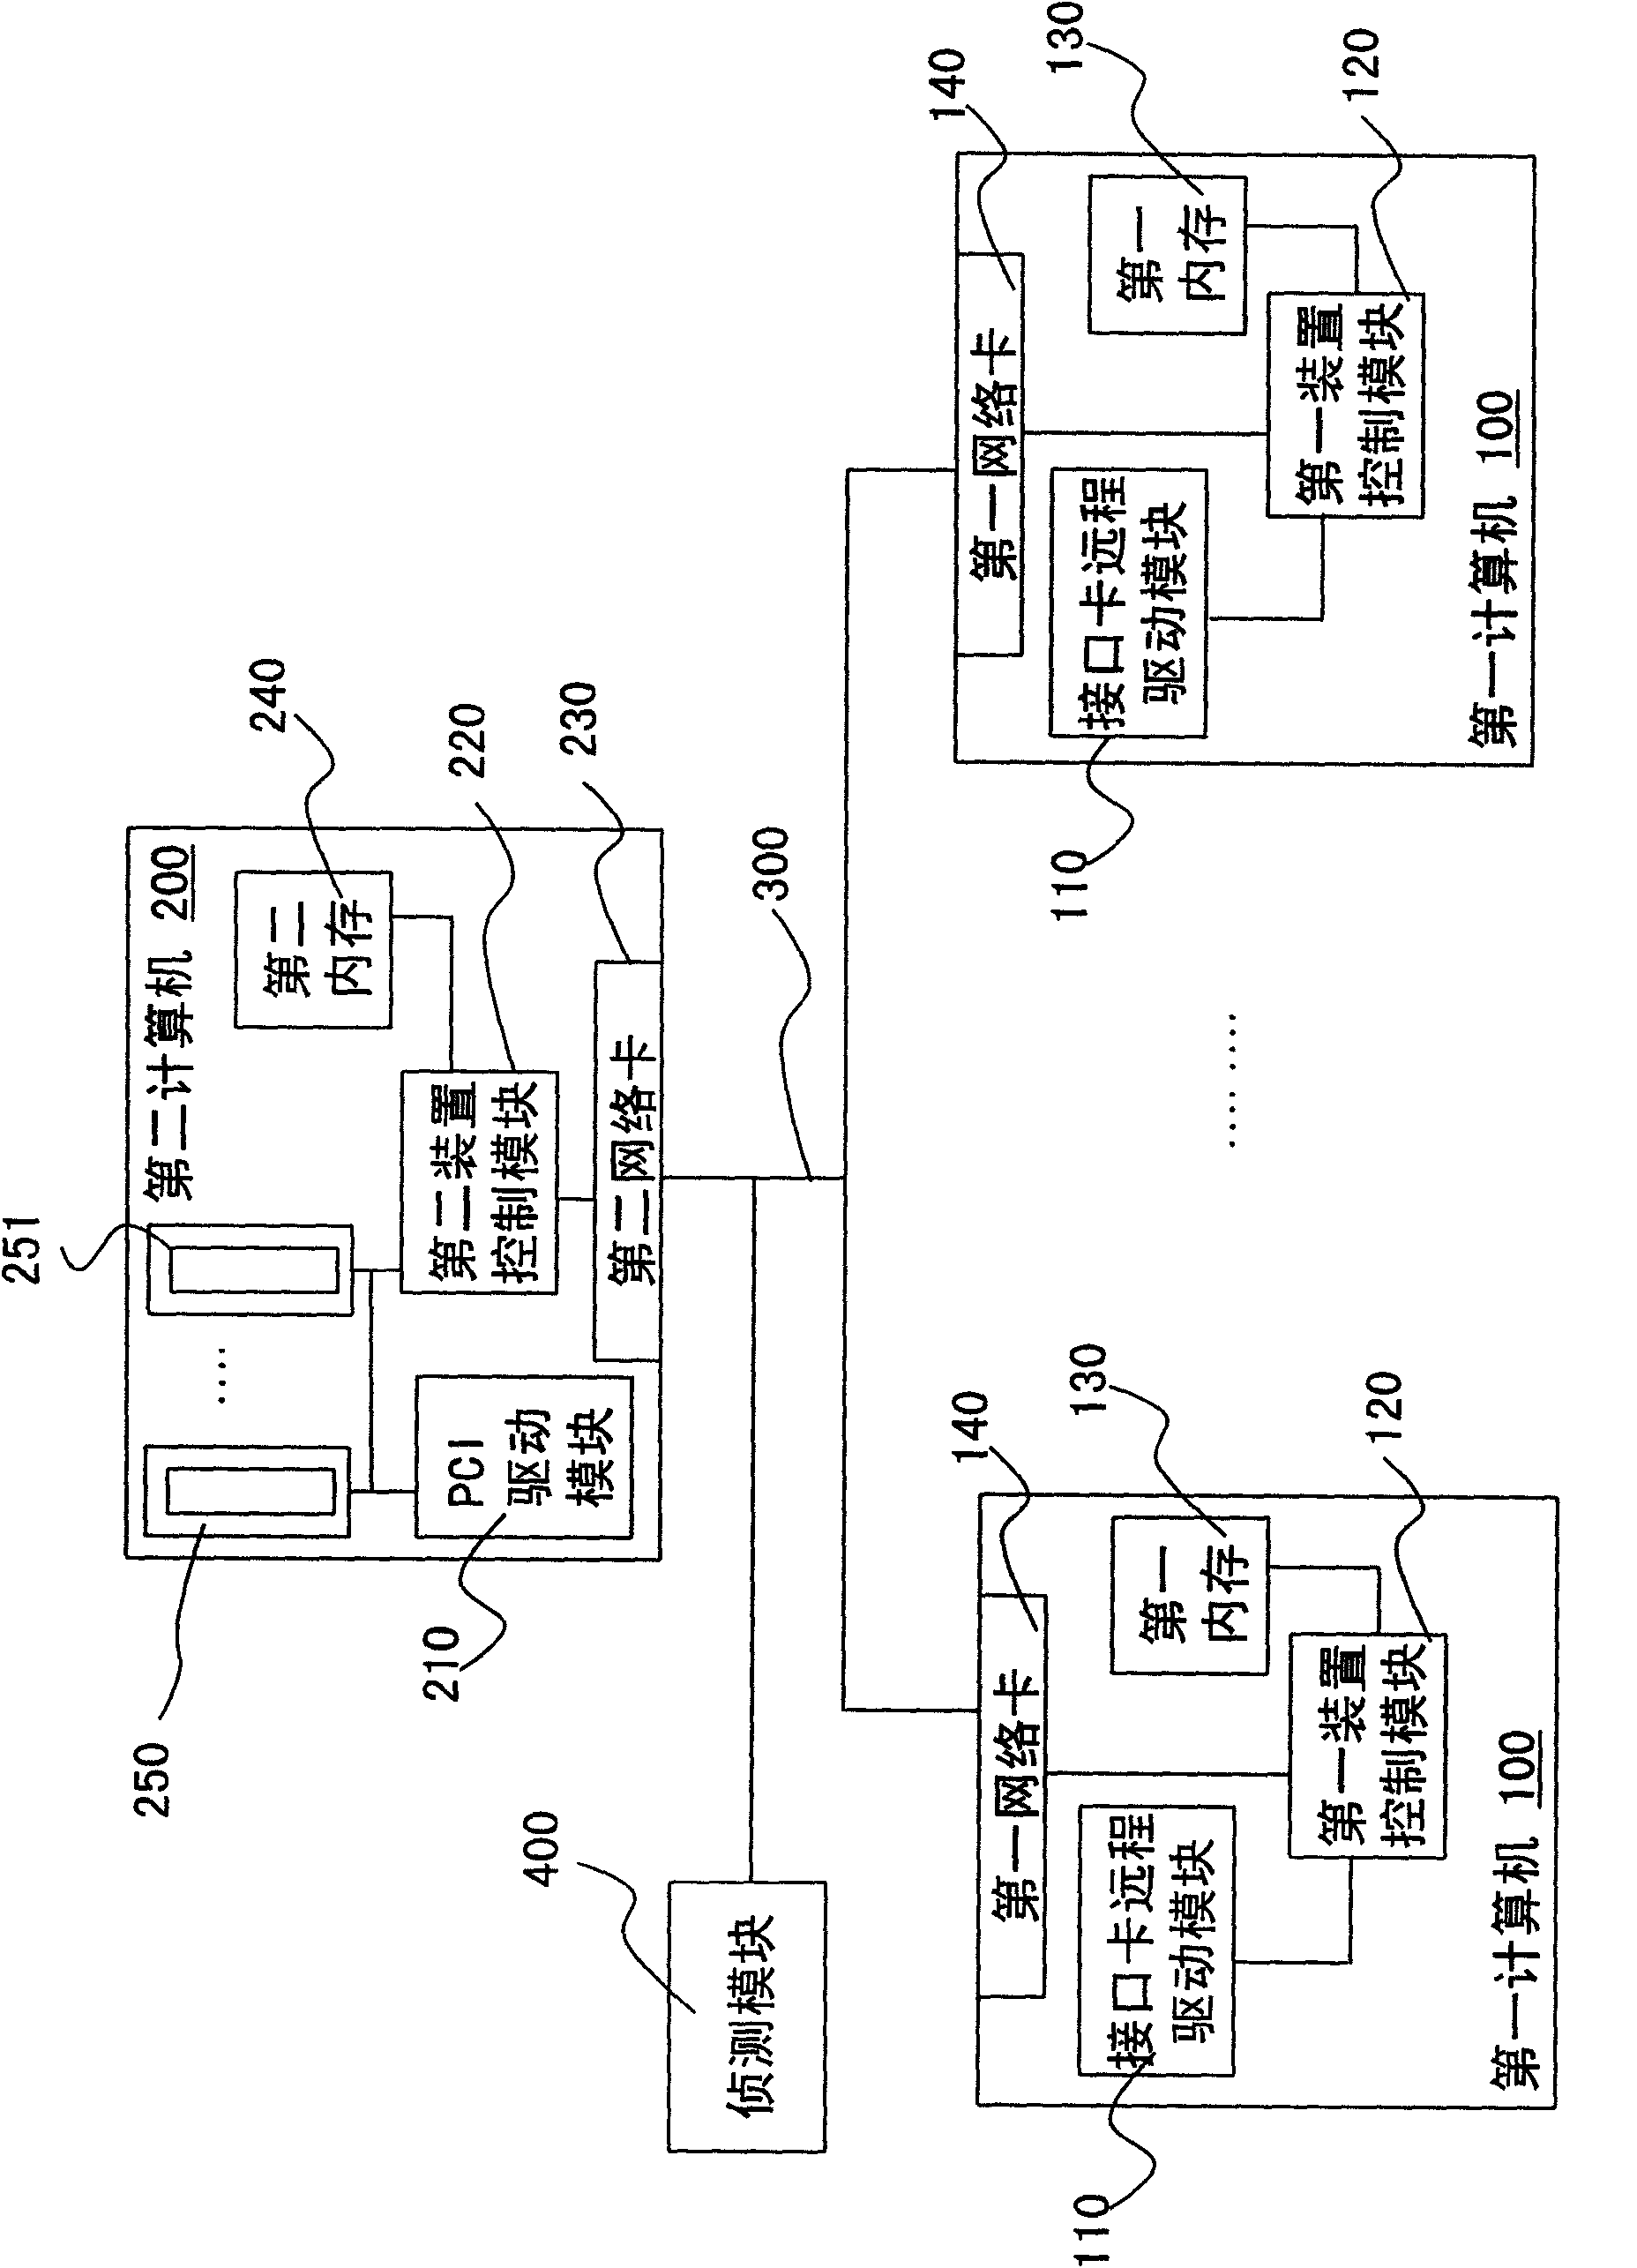 Method for remotely sharing peripheral component interconnect (PCI) device